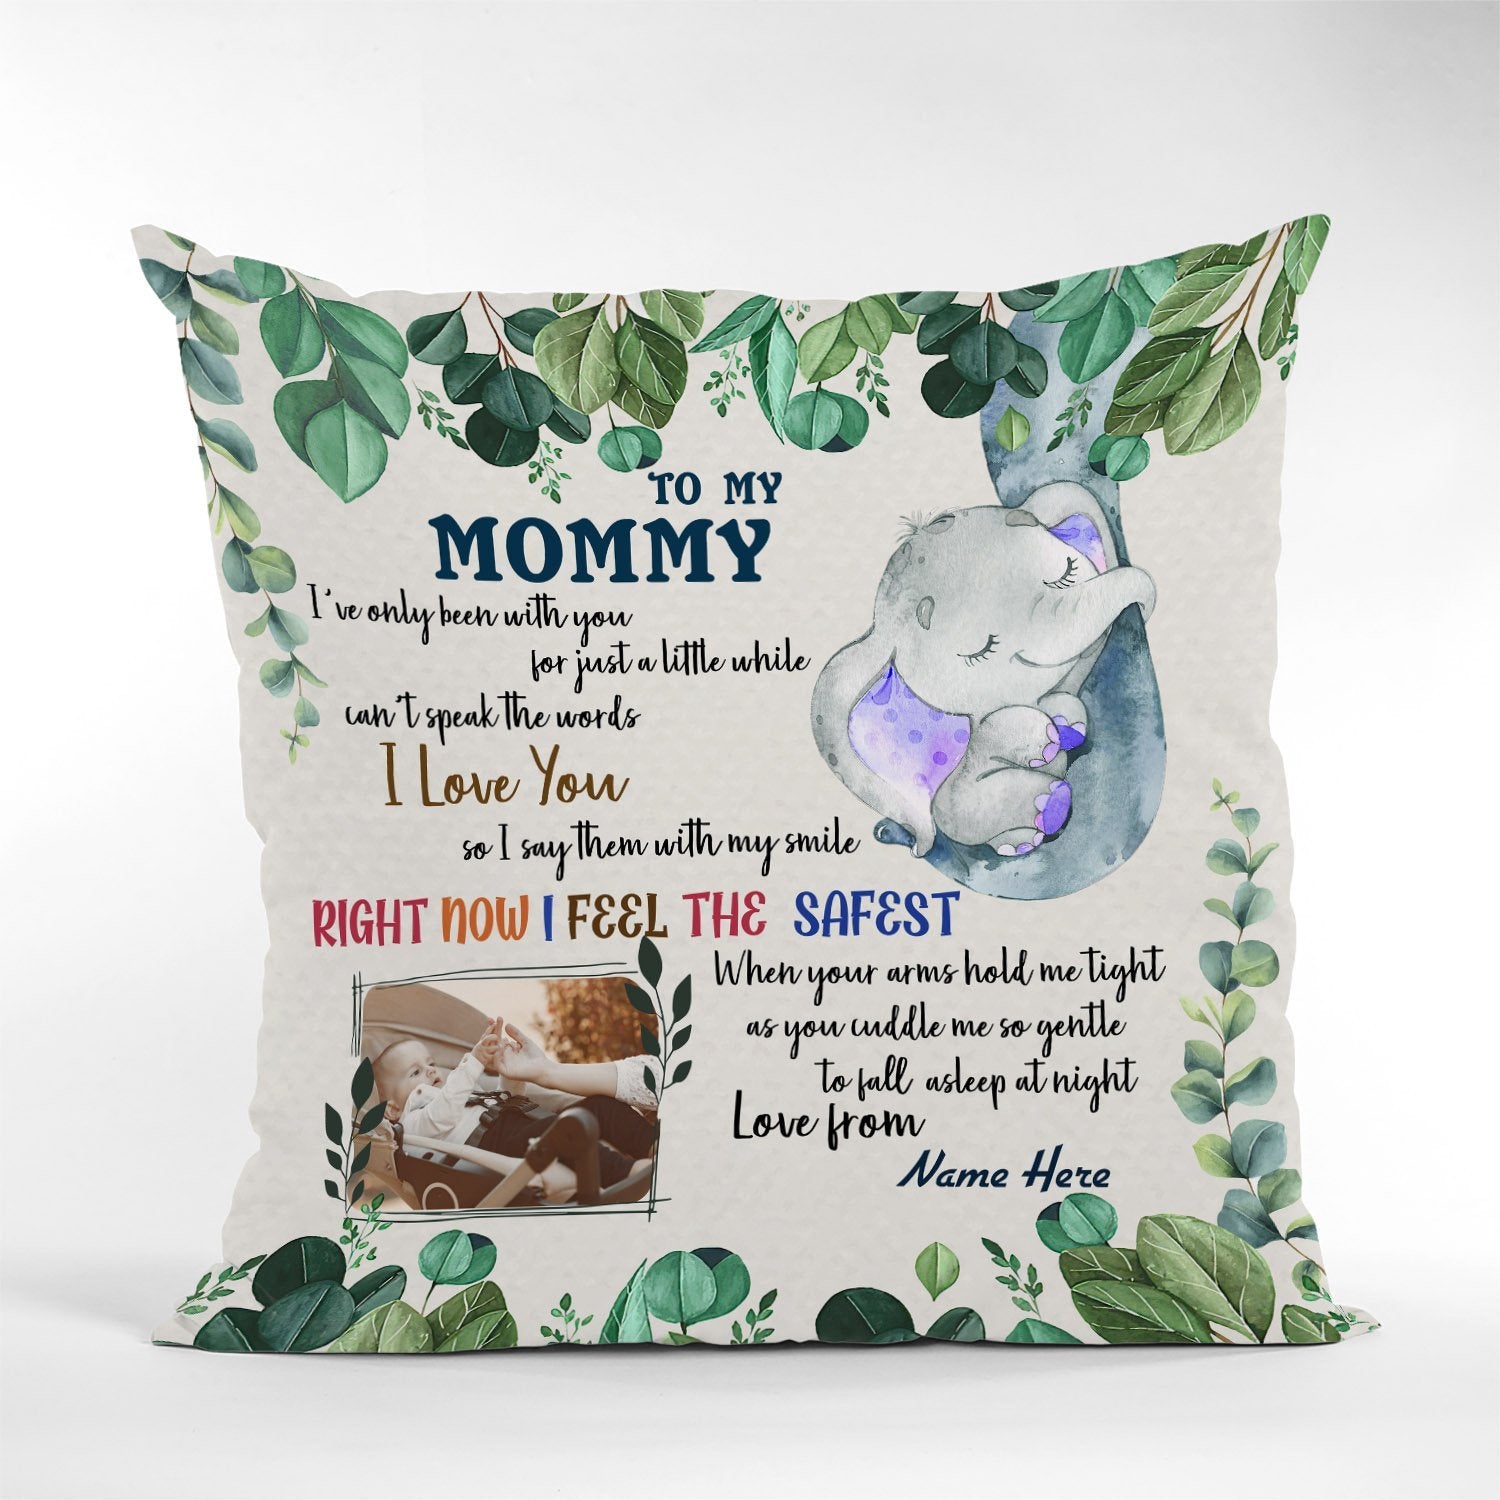 To My Mommy, I Love You, Right Now I Feel The Safest, Custom Photo Pillow